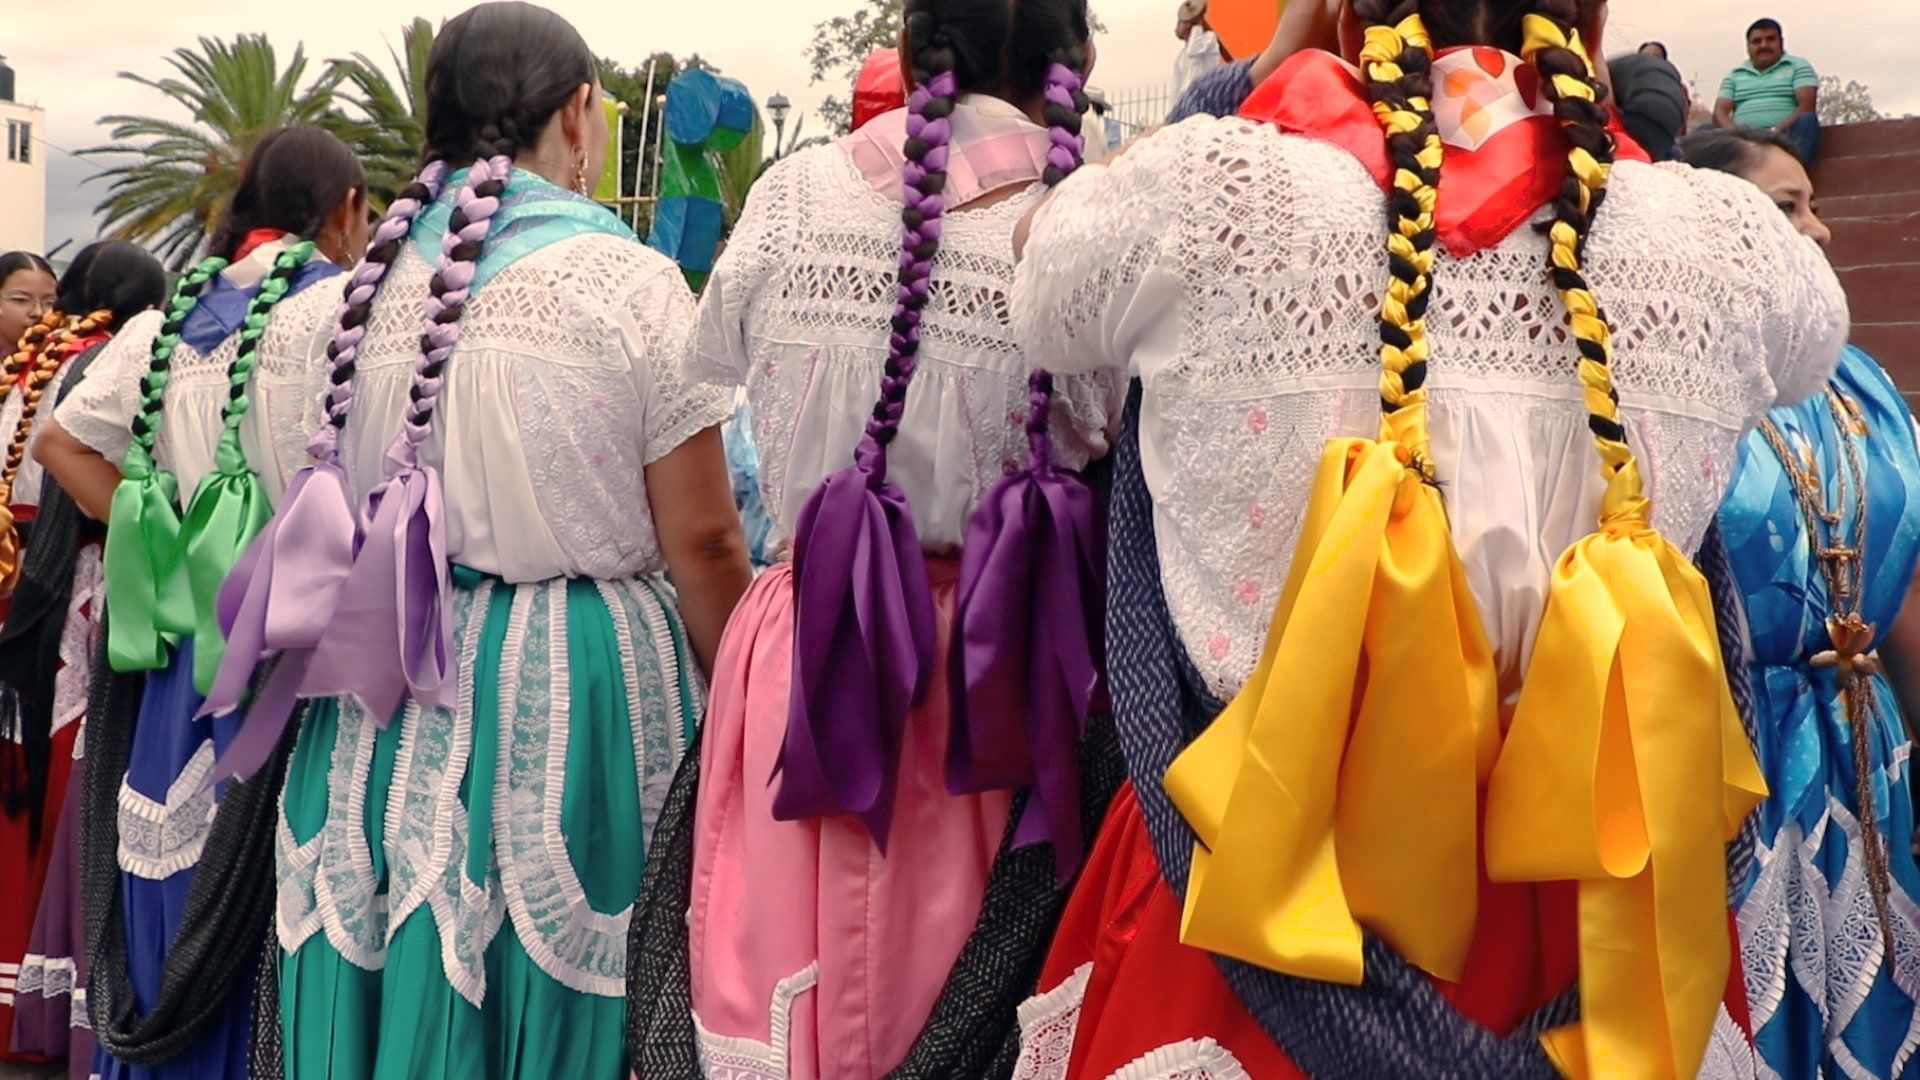 The Costumes of Mexico's Chinas Oaxaqueñas Folk Dancers